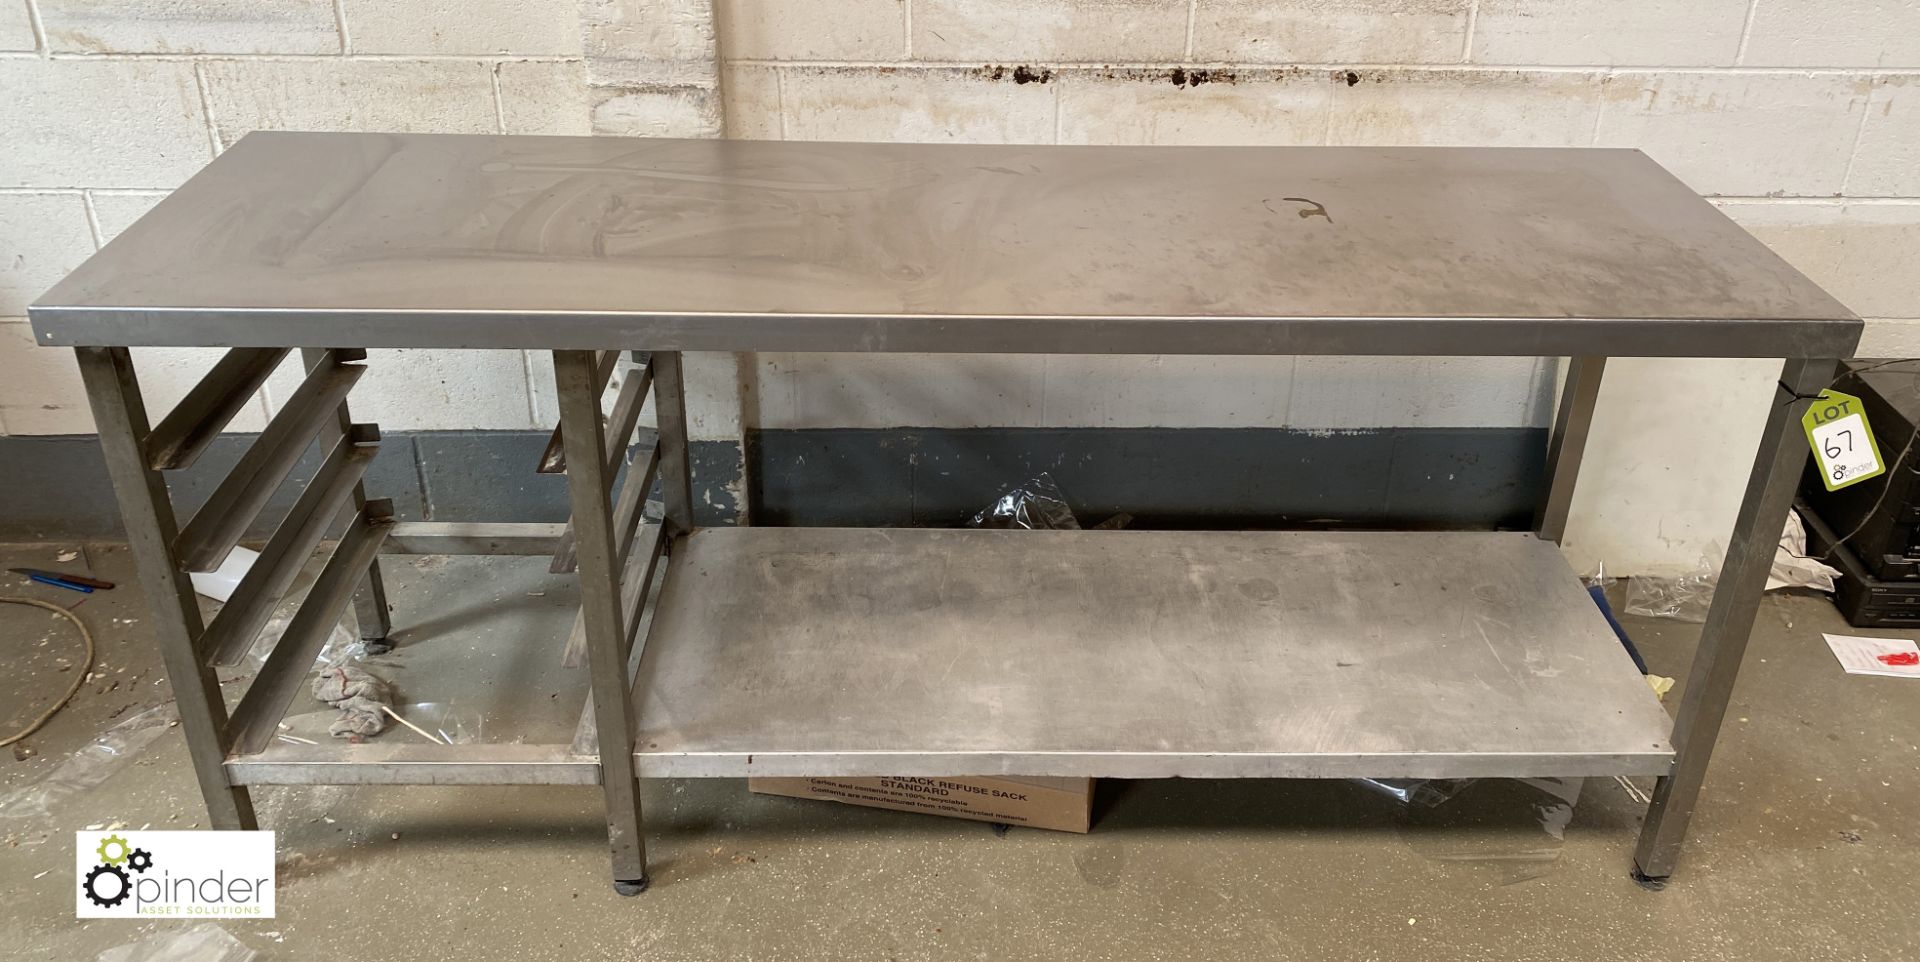 Stainless steel Preparation Table, 1980mm x 600mm x 865mm, with undershelf and tray supports ( - Image 2 of 3